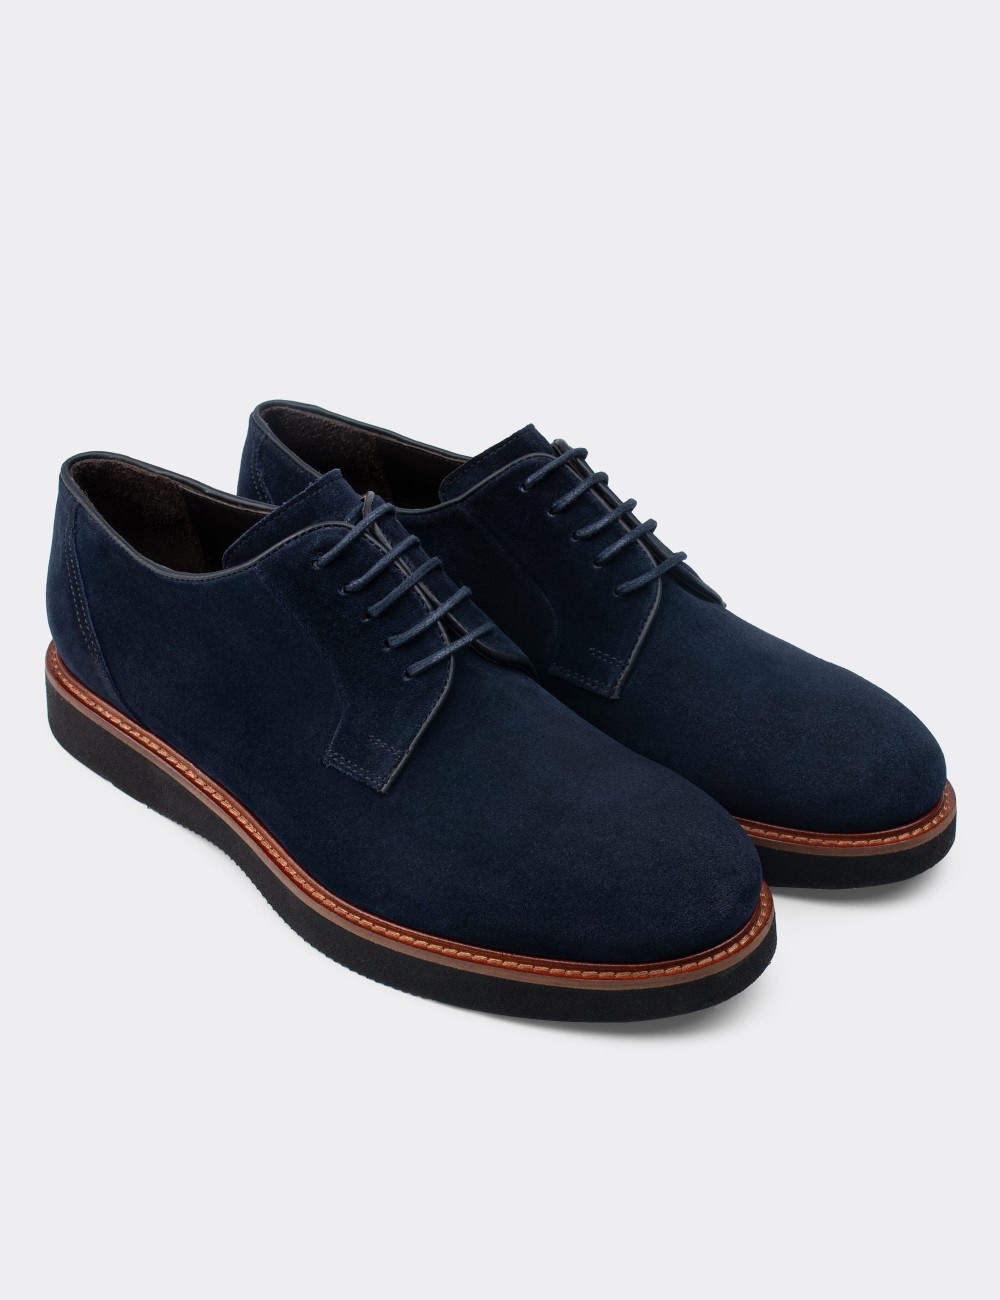 Navy Suede Leather Lace-up Shoes - 01090MLCVE06